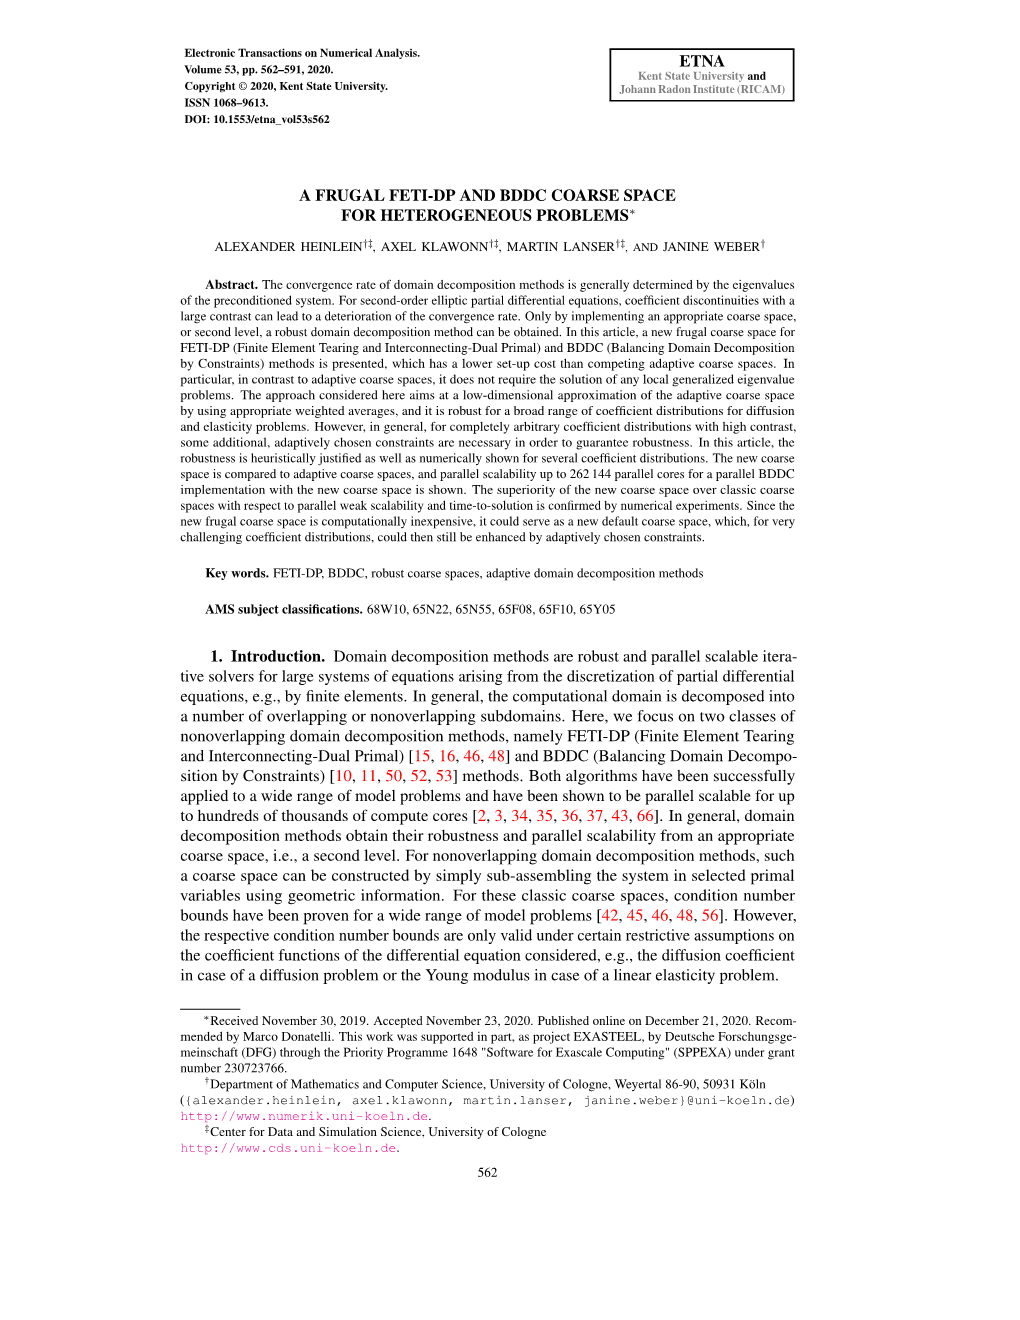 A Frugal Feti-Dp and Bddc Coarse Space for Heterogeneous Problems∗